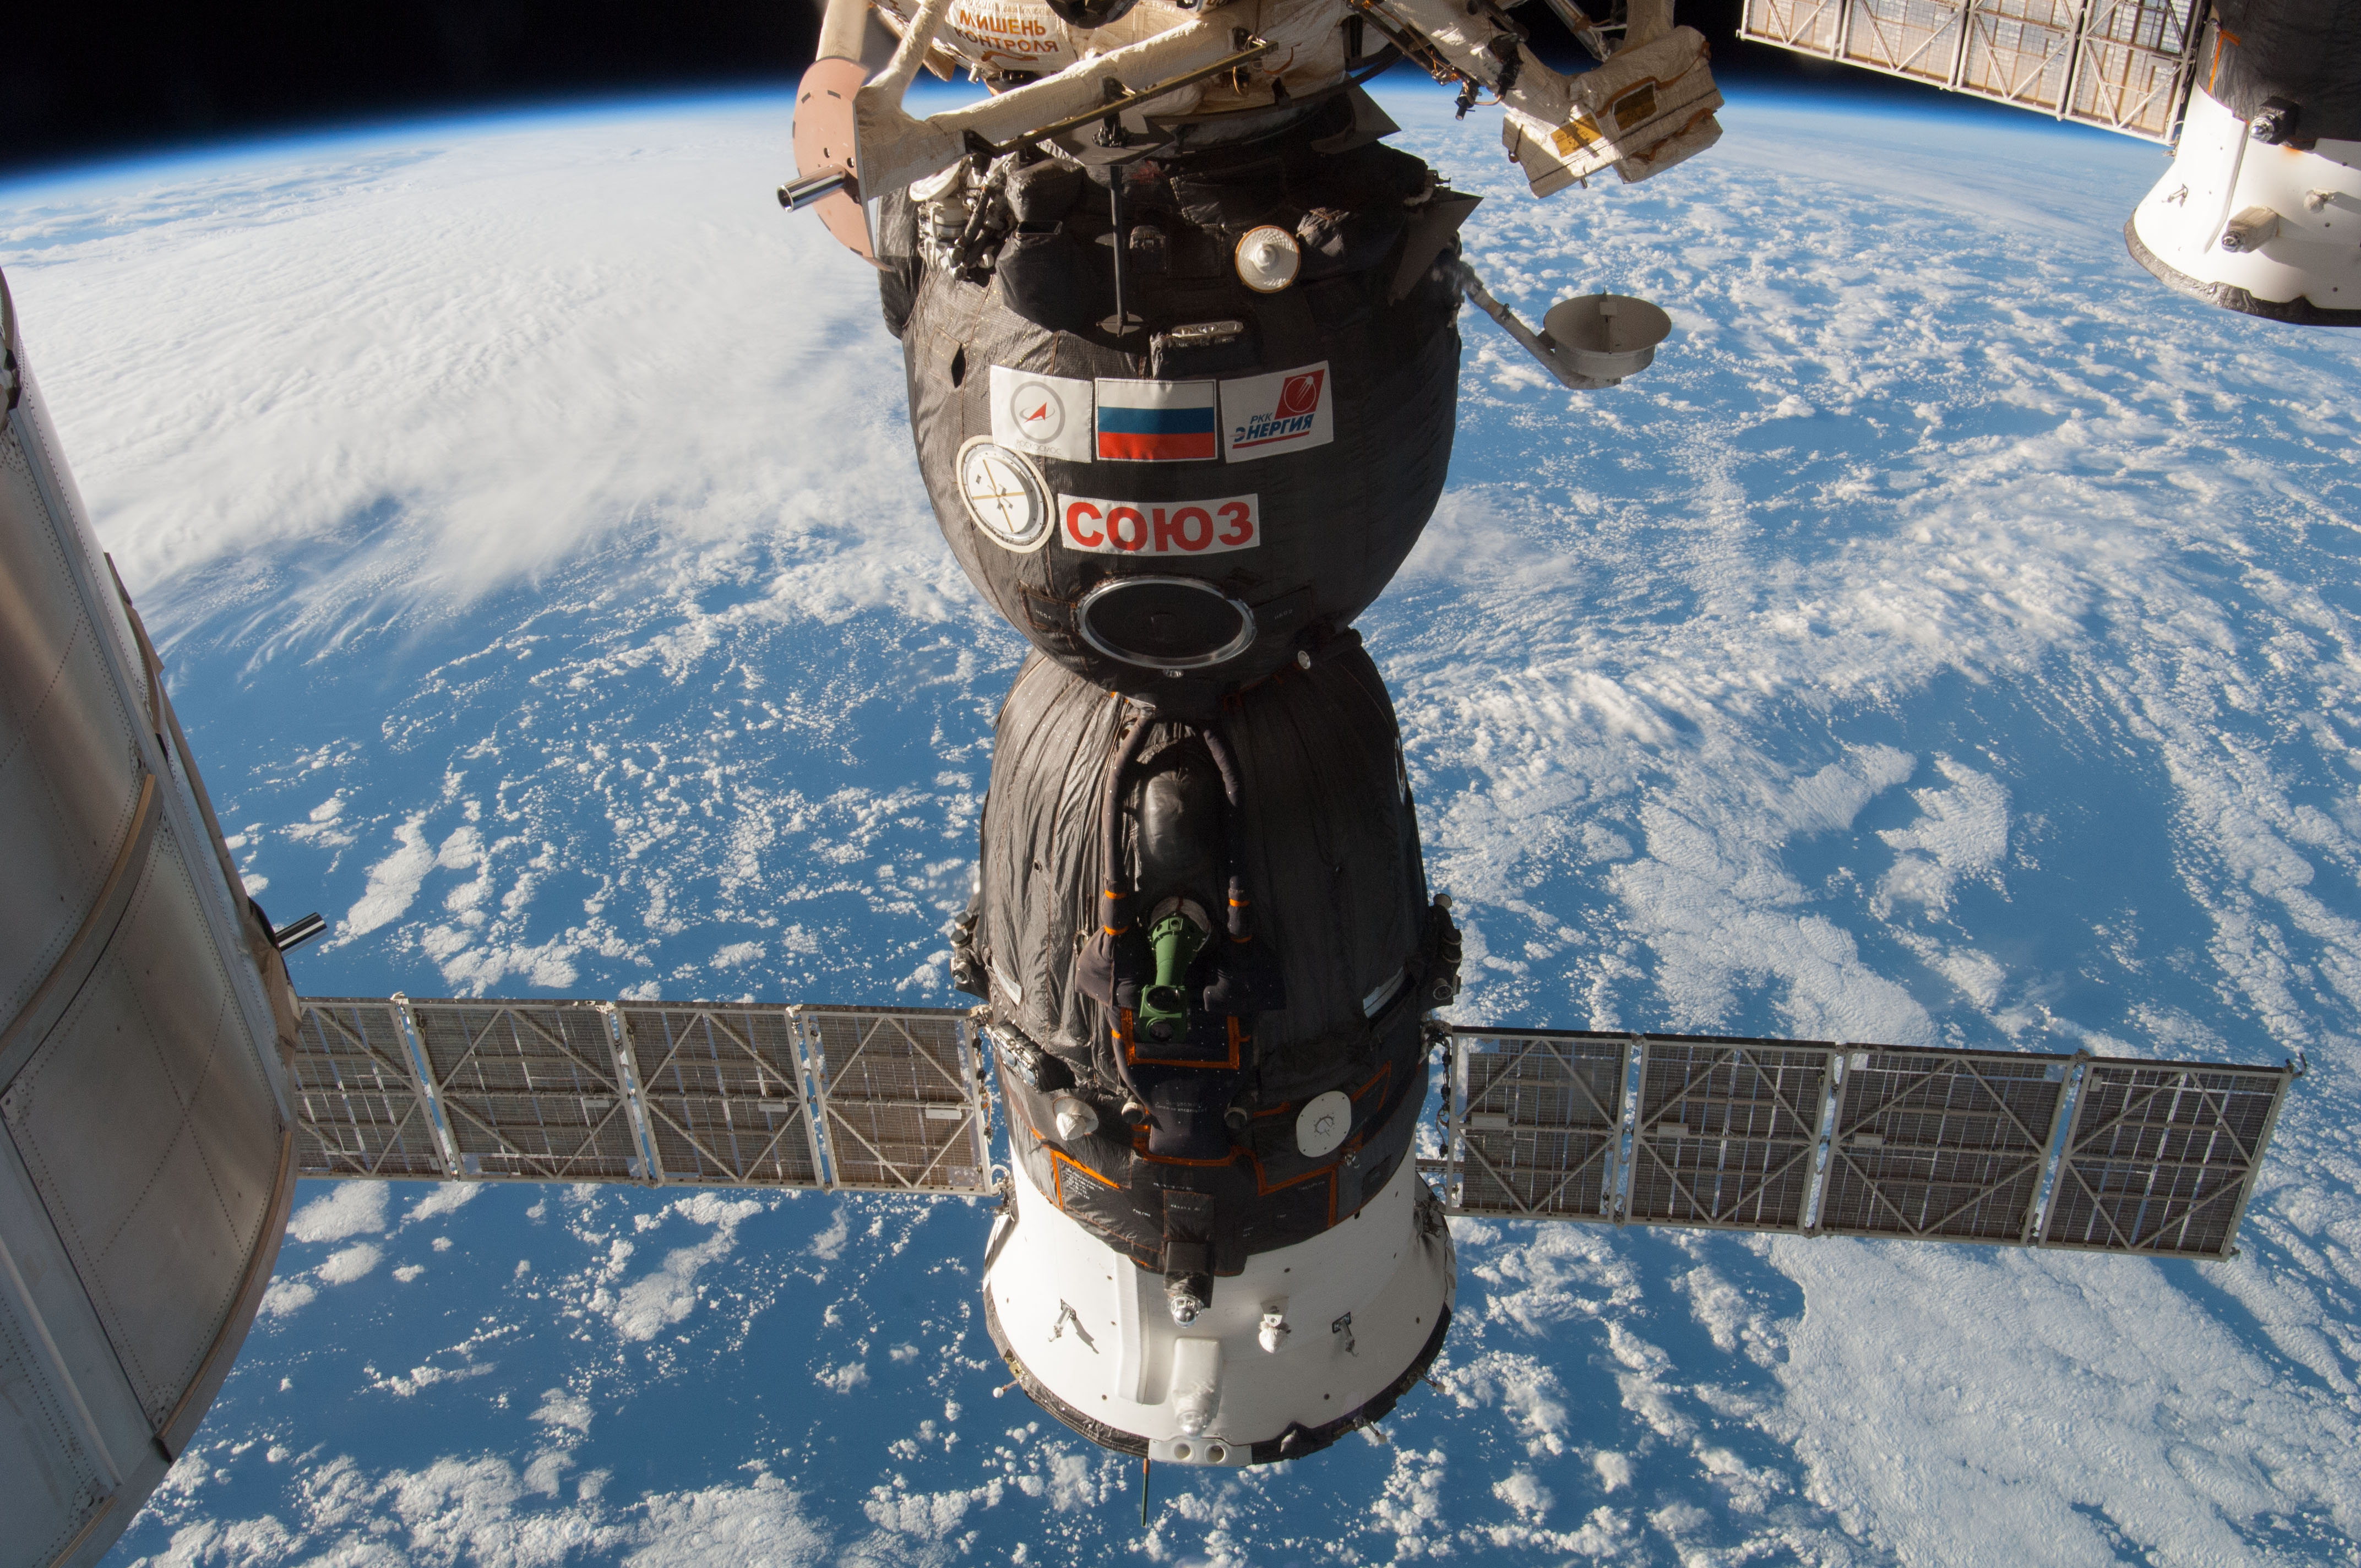 Science News Roundup: Russian cosmonauts take samples on sixth hour of spacewalk to crack mystery